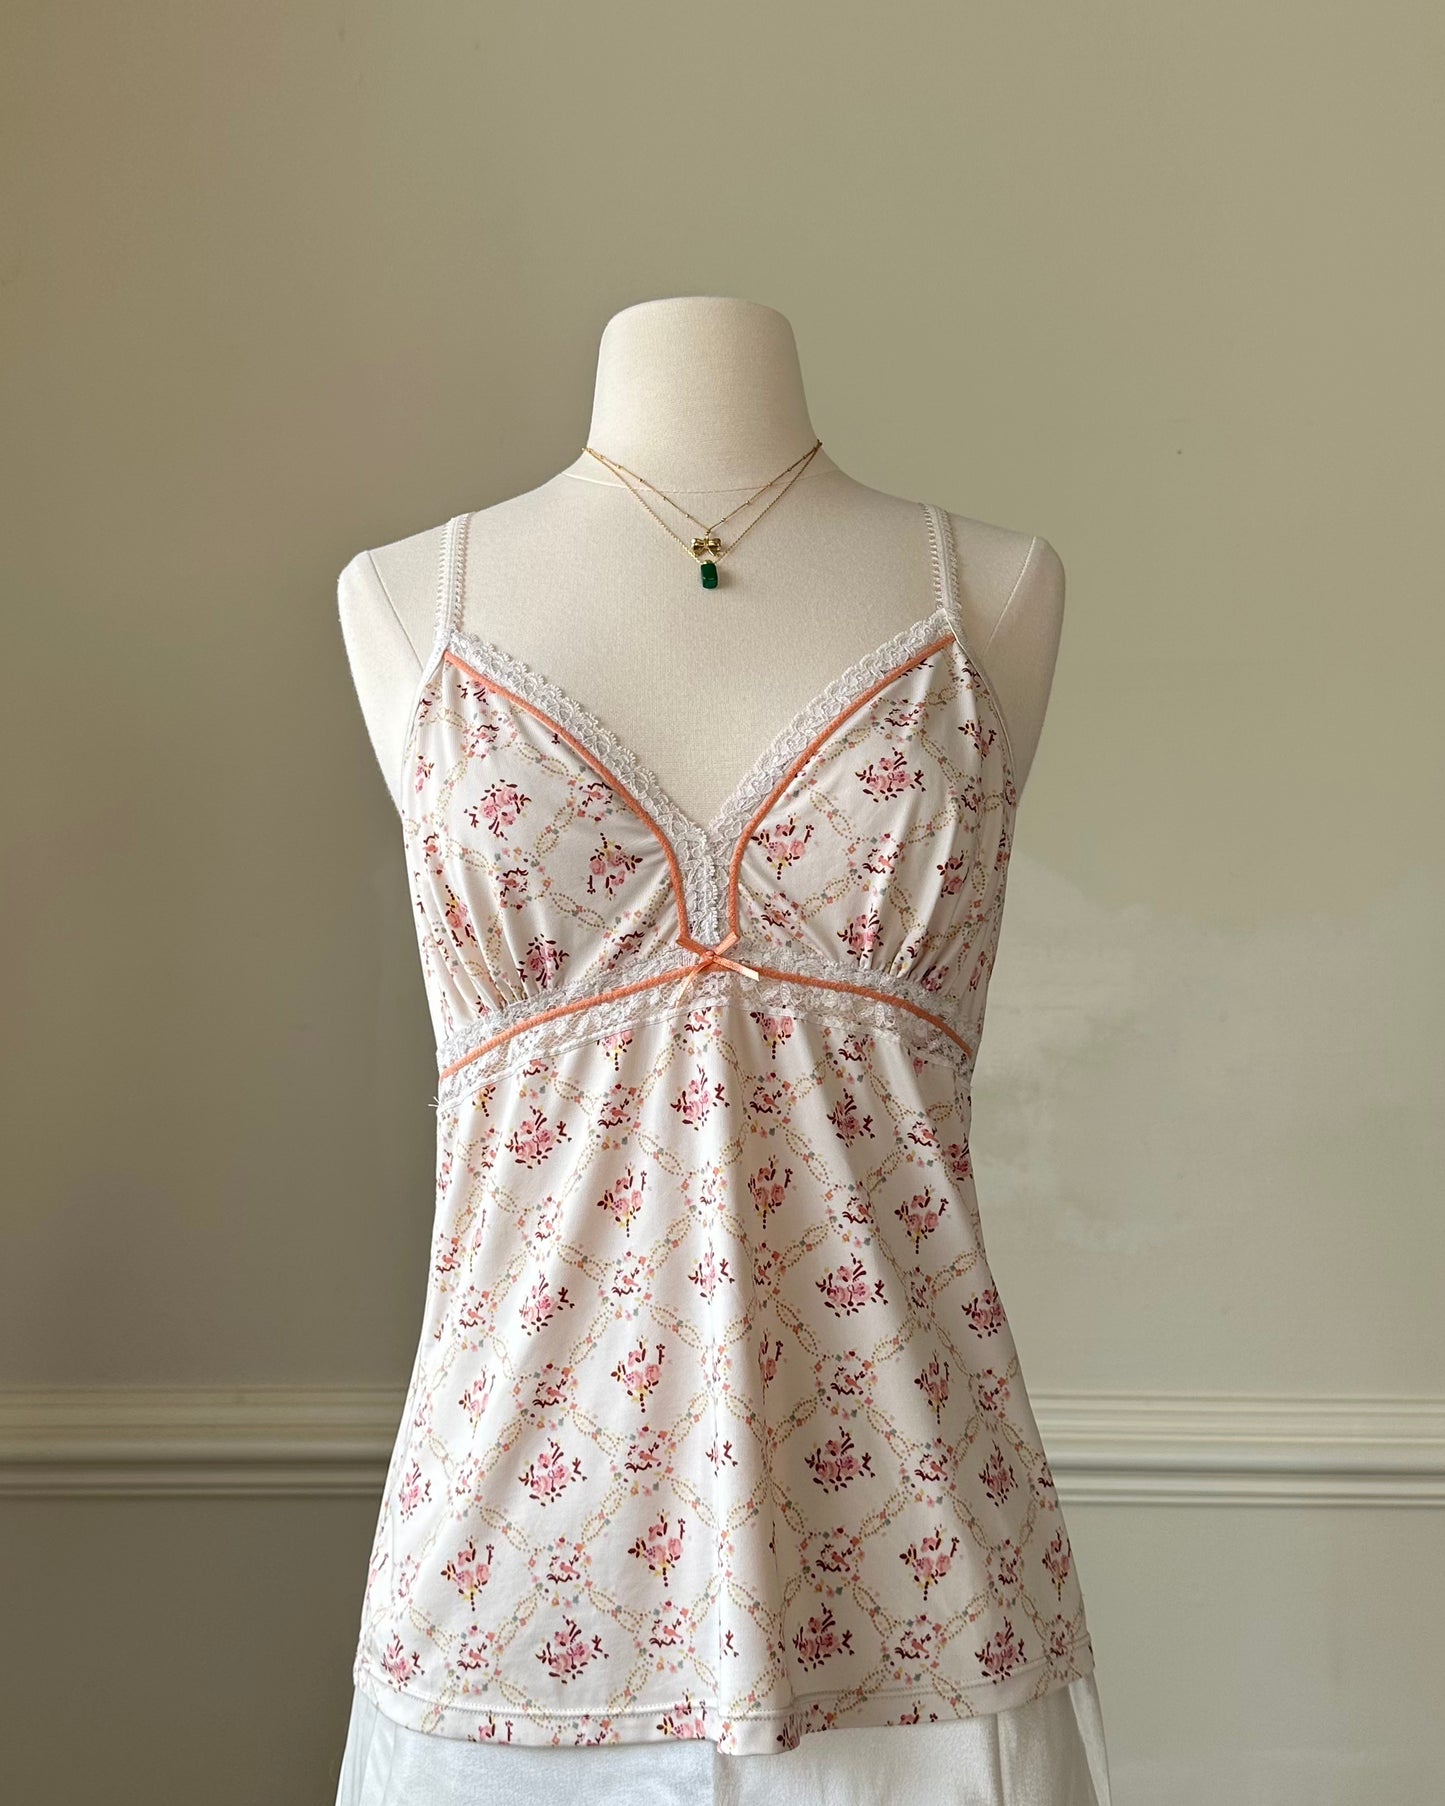 Vintage Rosette Print Camisole featuring Laced Embroidery